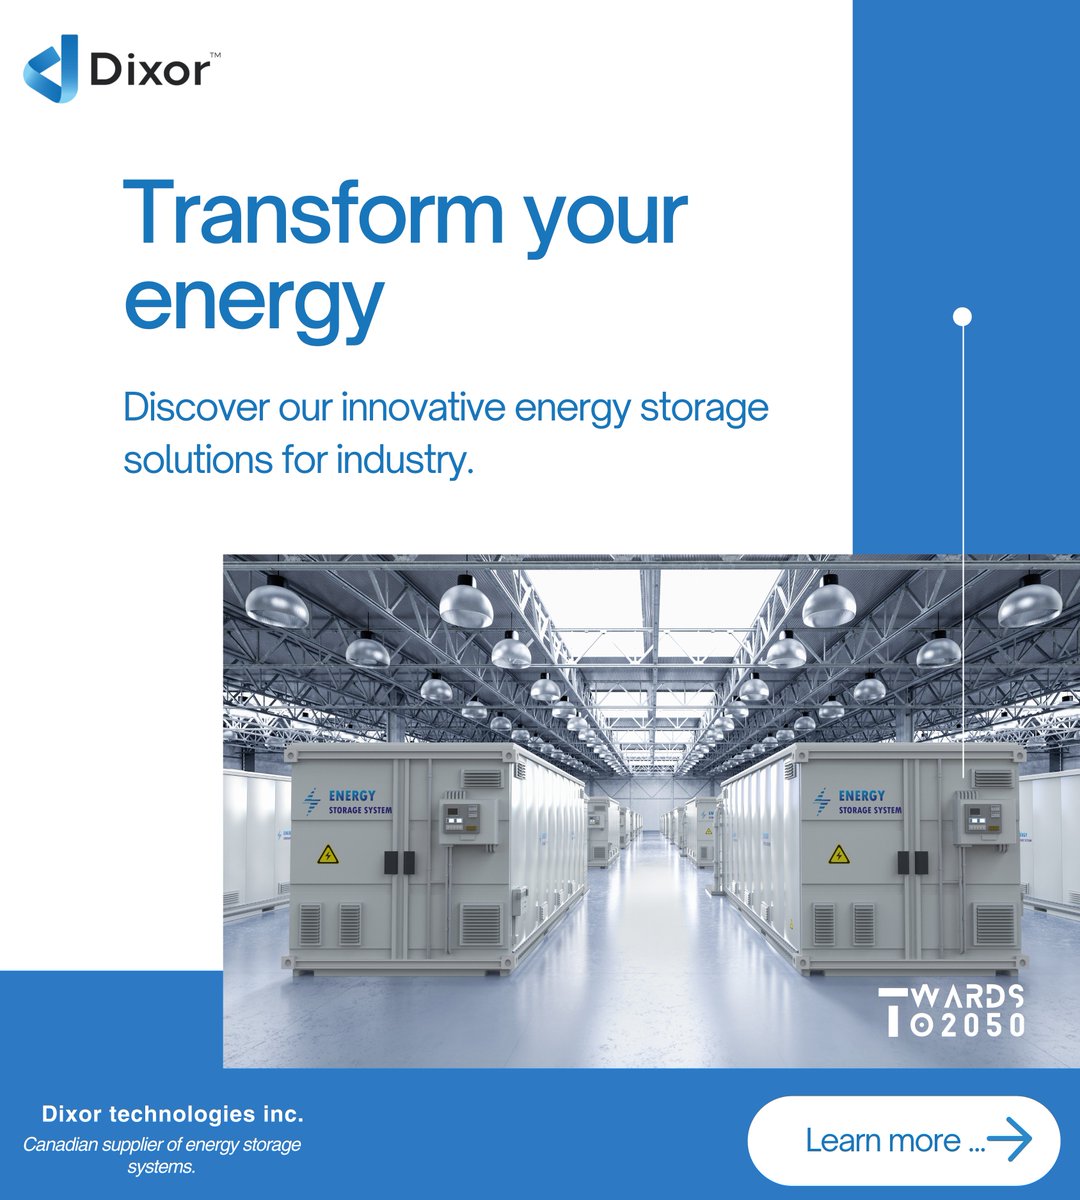 Discover our innovative energy storage solutions for industry.
#RenewablePower #energyefficiency #EcoInnovation #GreenTechnology #EnergyTransition #CleanEnergy #FutureOfEnergy #PowerSolutions #ResponsibleEnergy #SmartEnergy #PositiveEnergy #EnergyConsumption #AutonomousEnergy